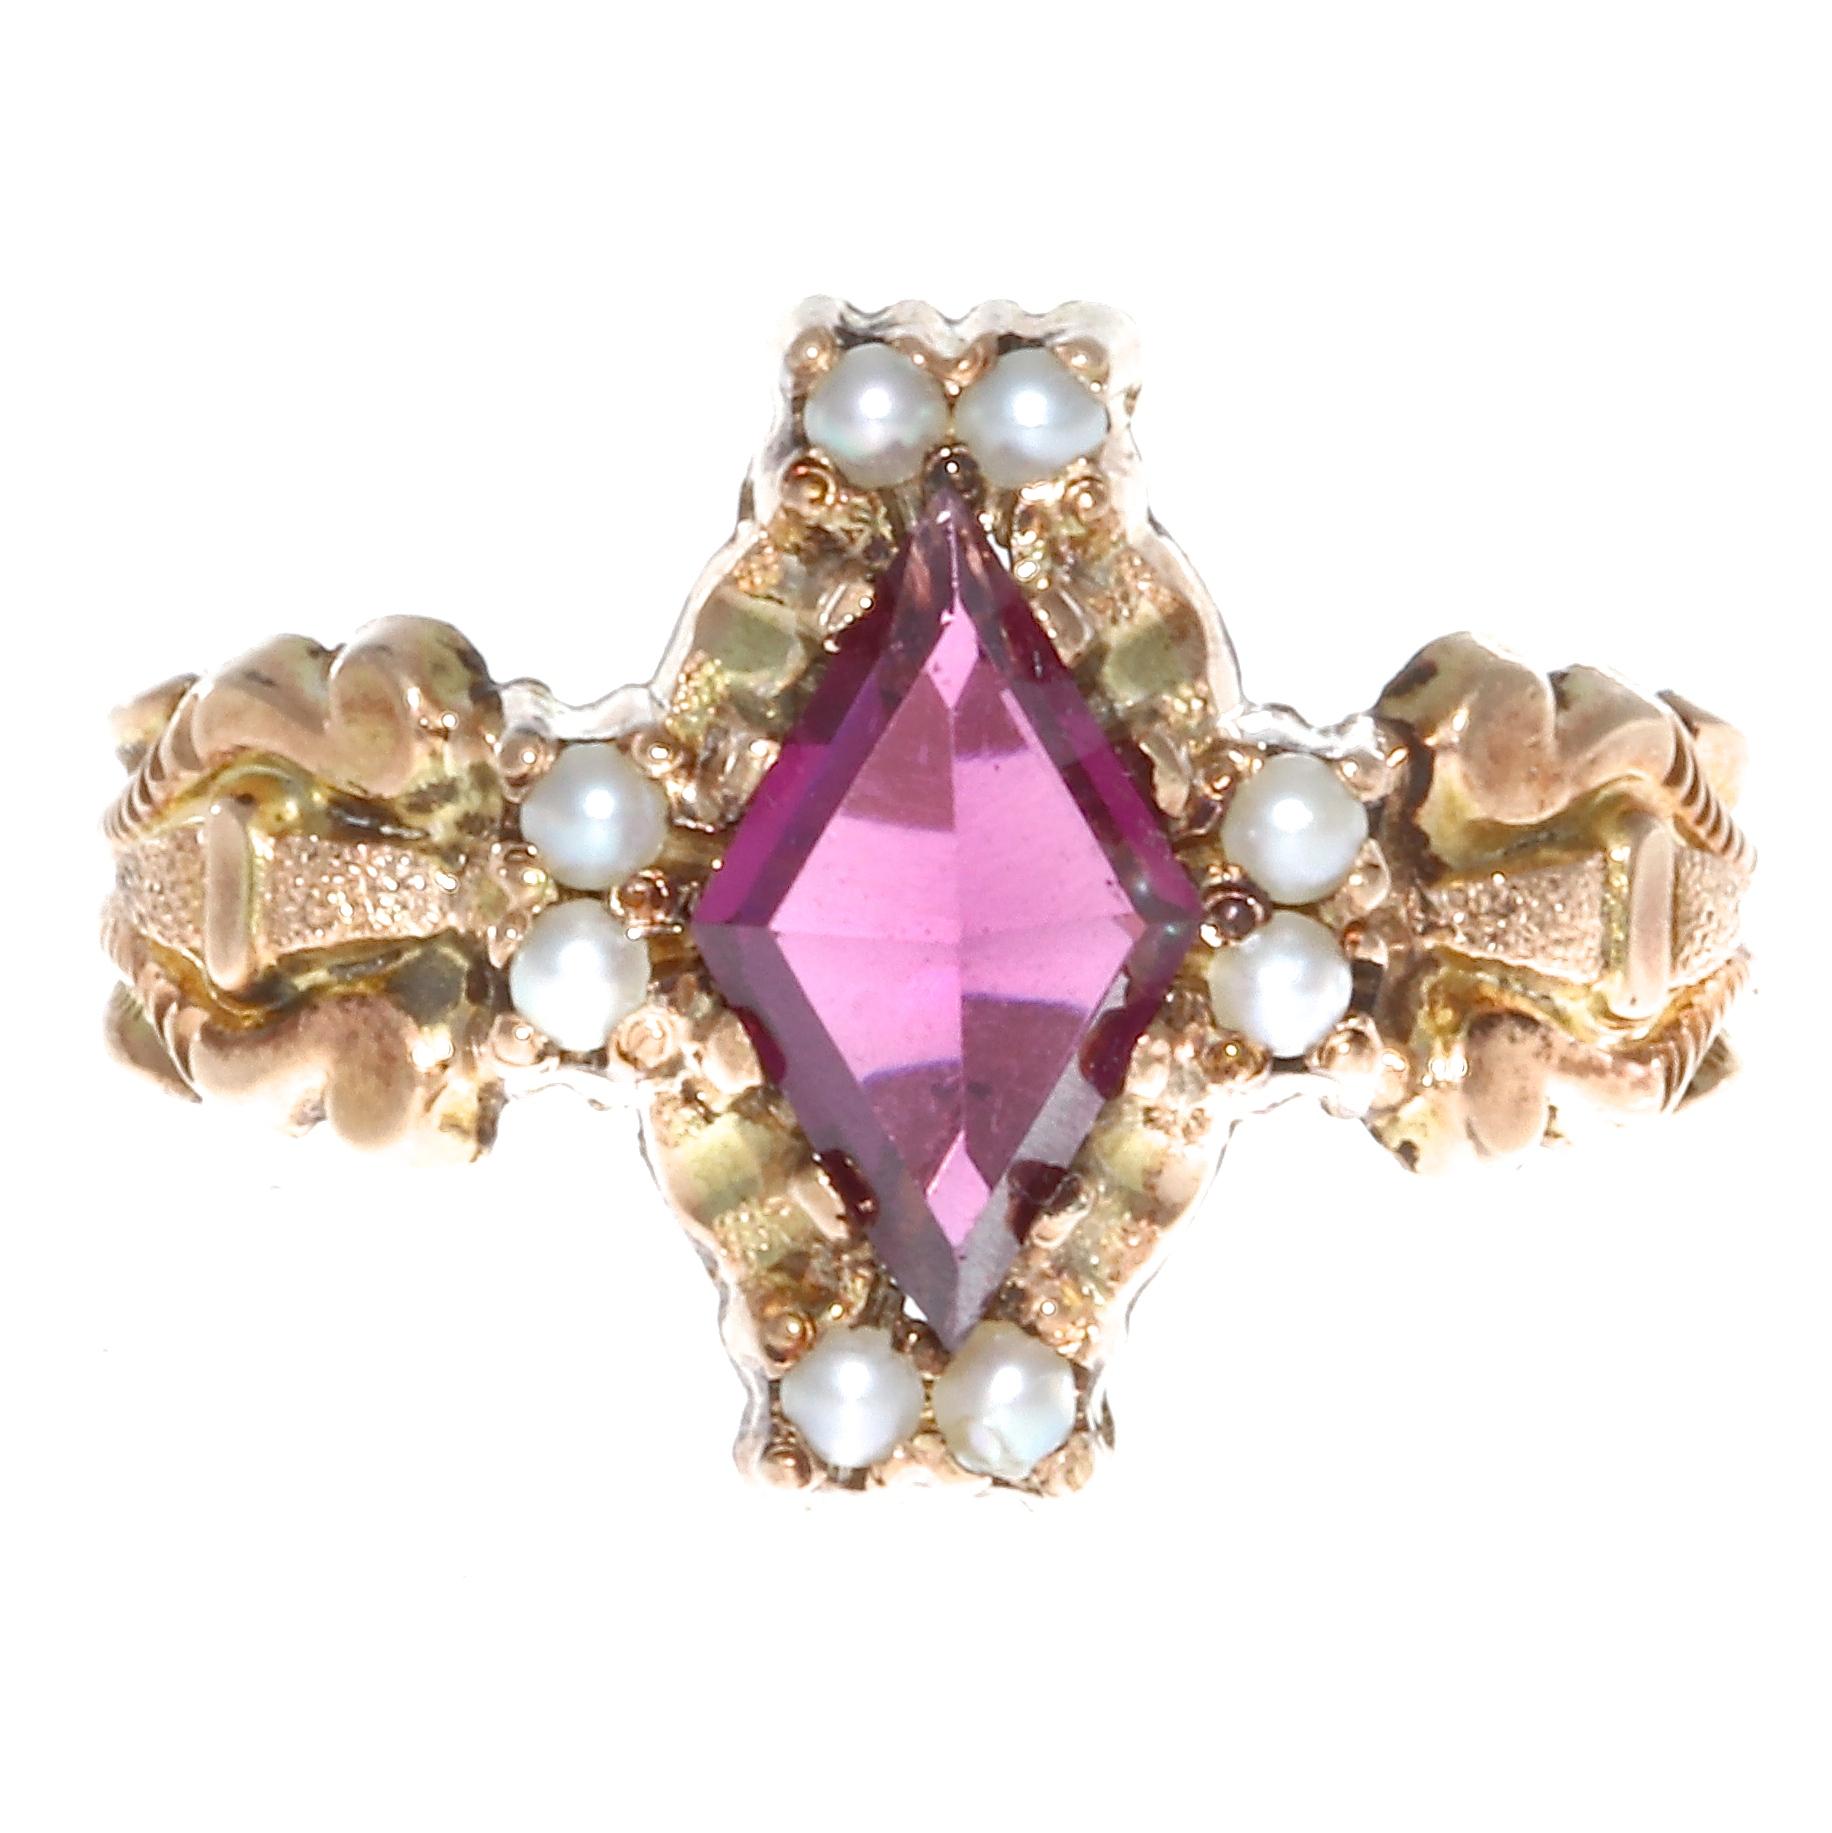 This Victorian ring features a garnet with a lovely royal purple color. The garnet weighs approximately 0.85 carats accented with 10 pearls.  The ring is crafted in 14k gold, size 5 1/4 and may easily be re-sized to fit.  Circa 1800's.
Flawless